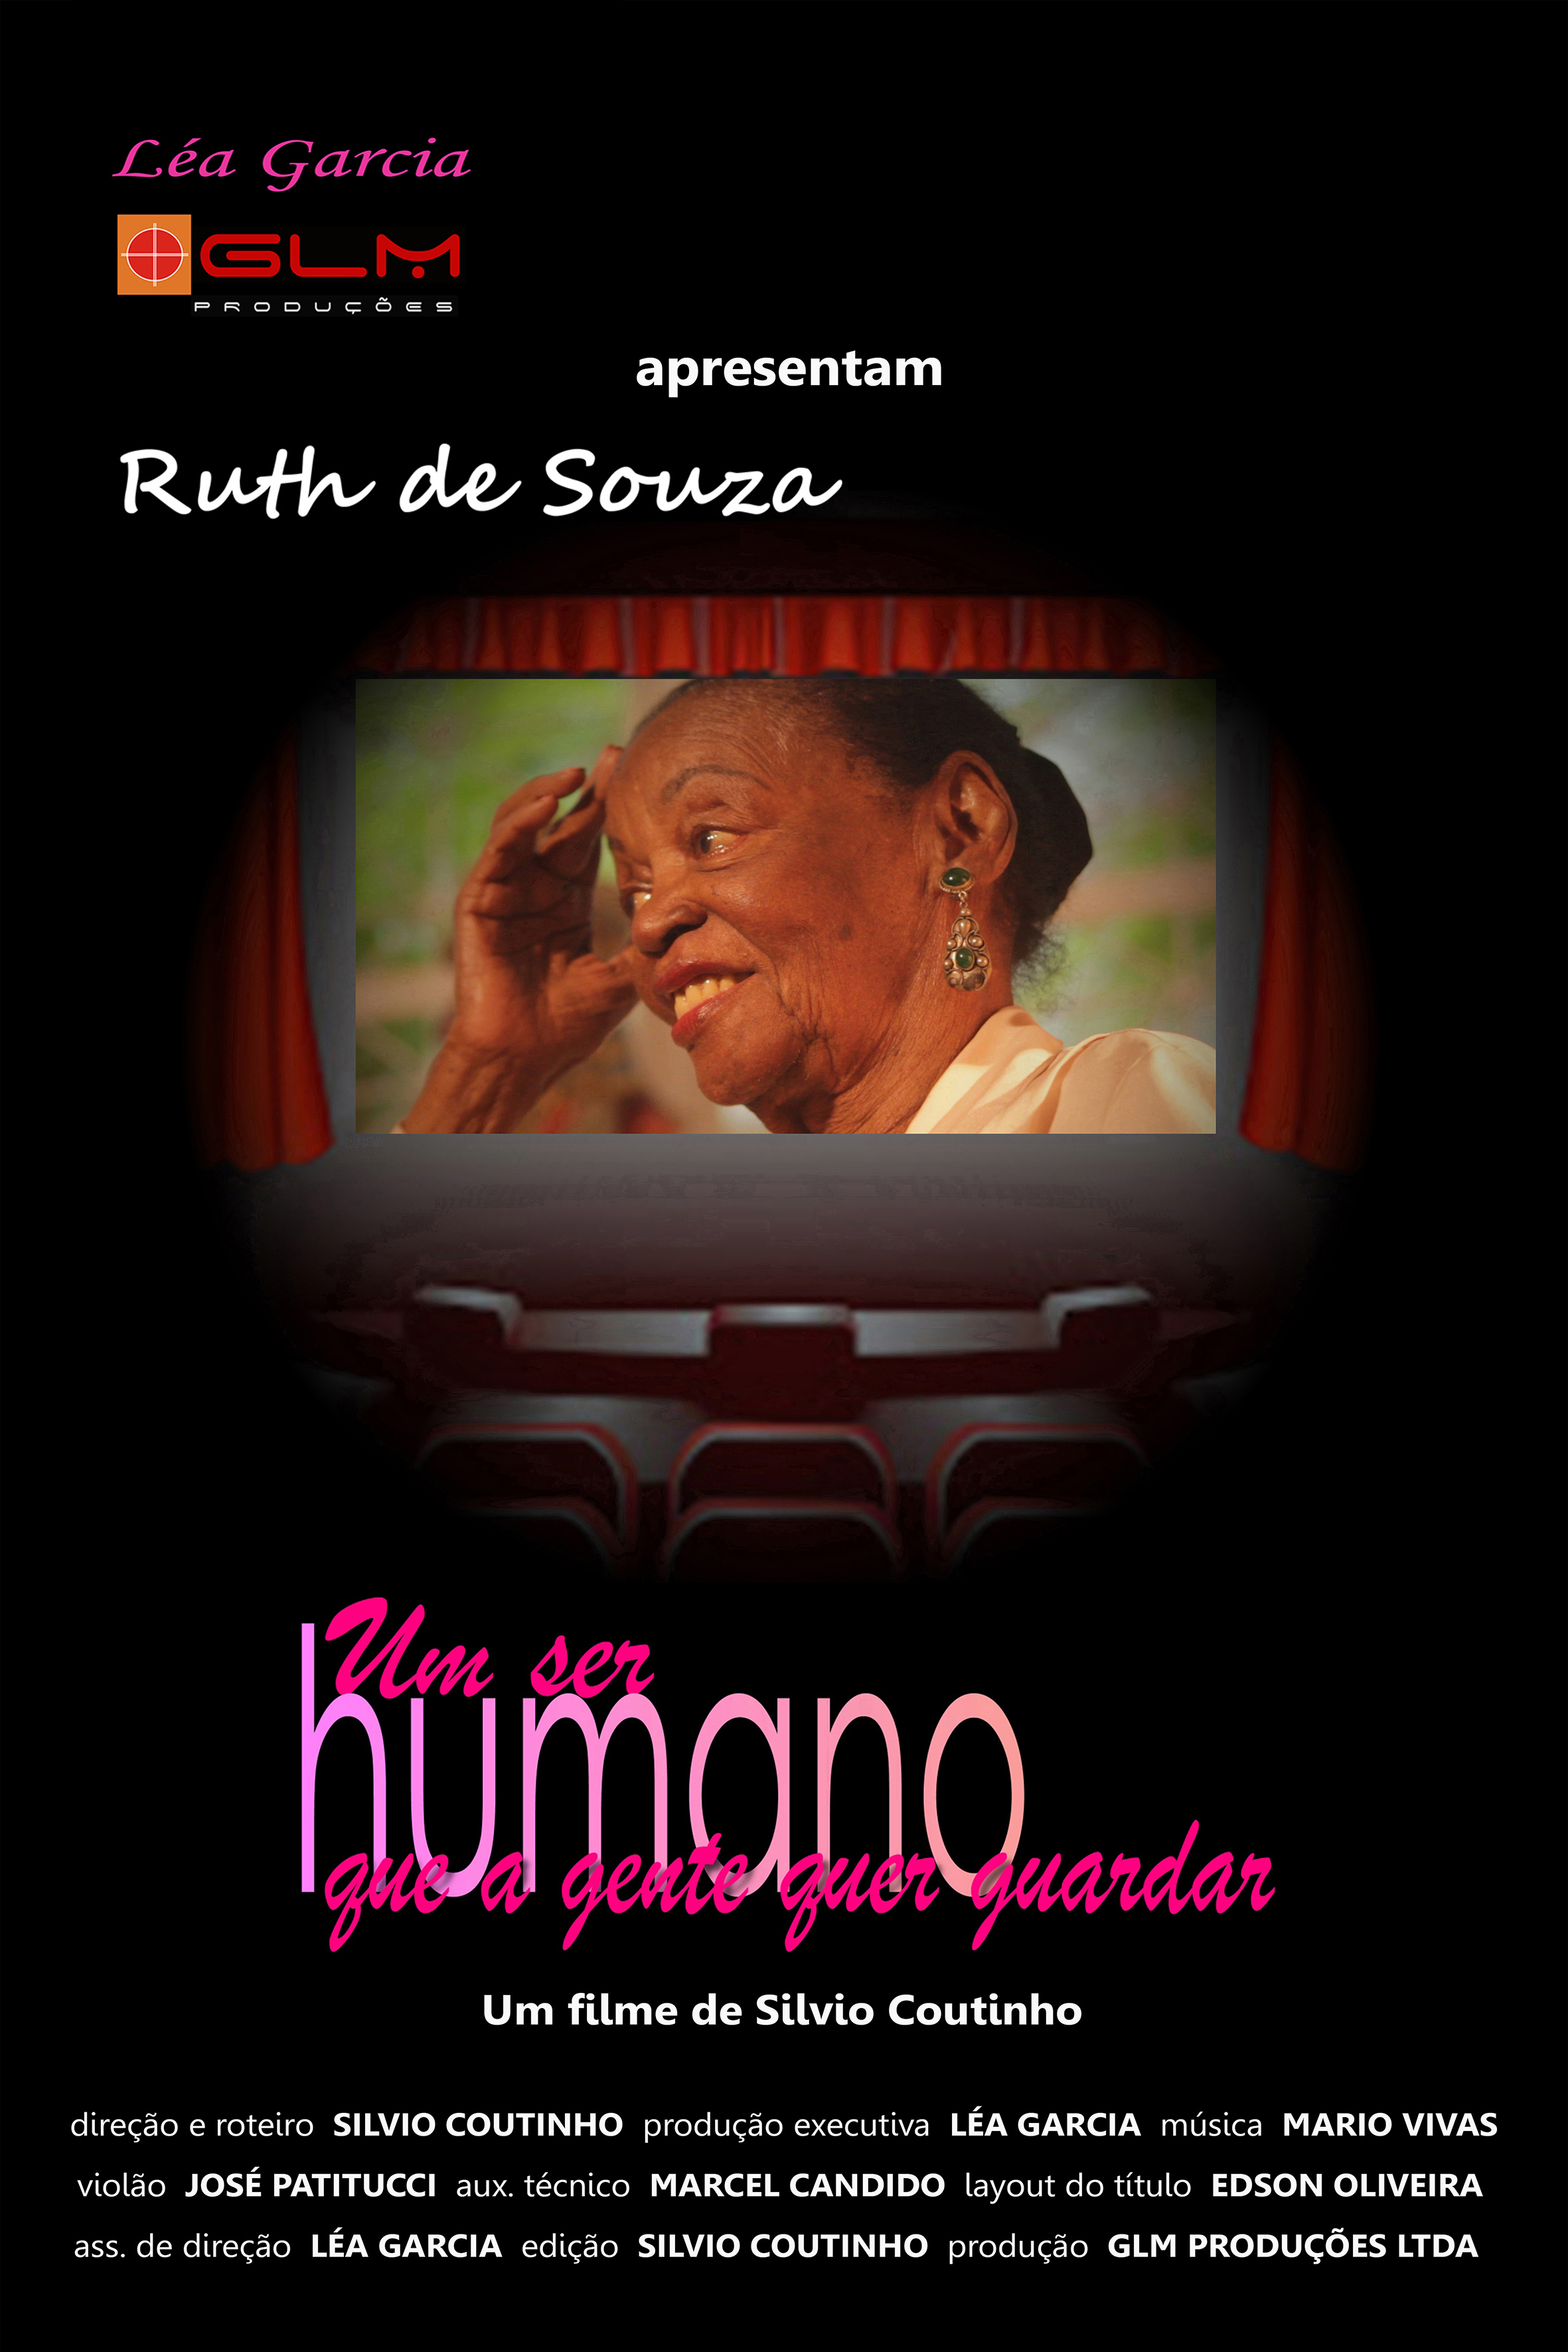 RUTH DE SOUZA - an human being we want to remember - 2013